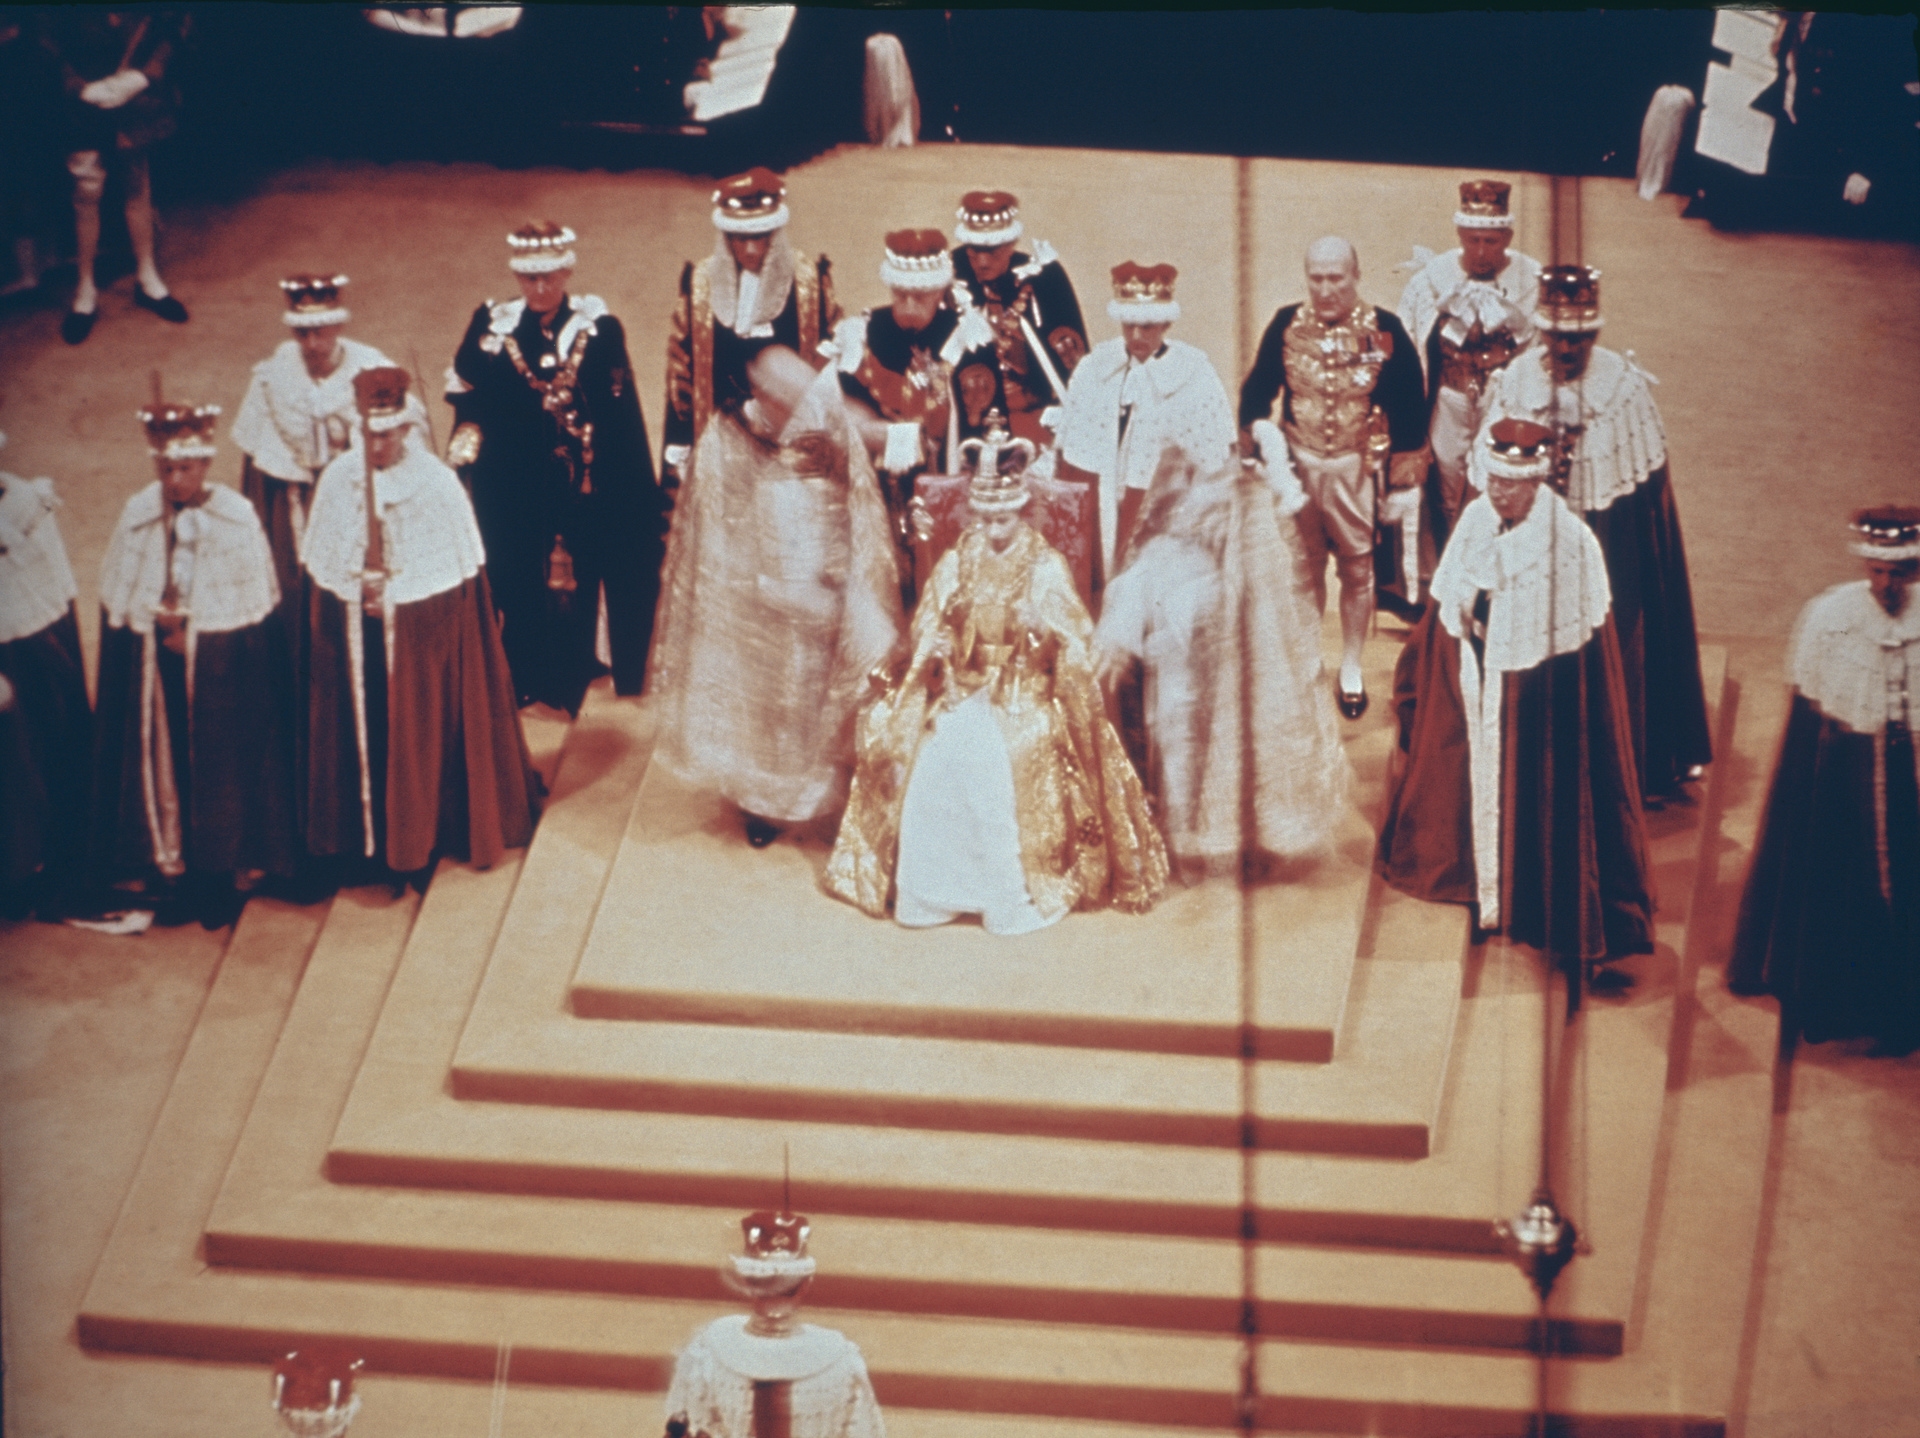 The scene inside Westminster Abbey during the coronation in June 1953.